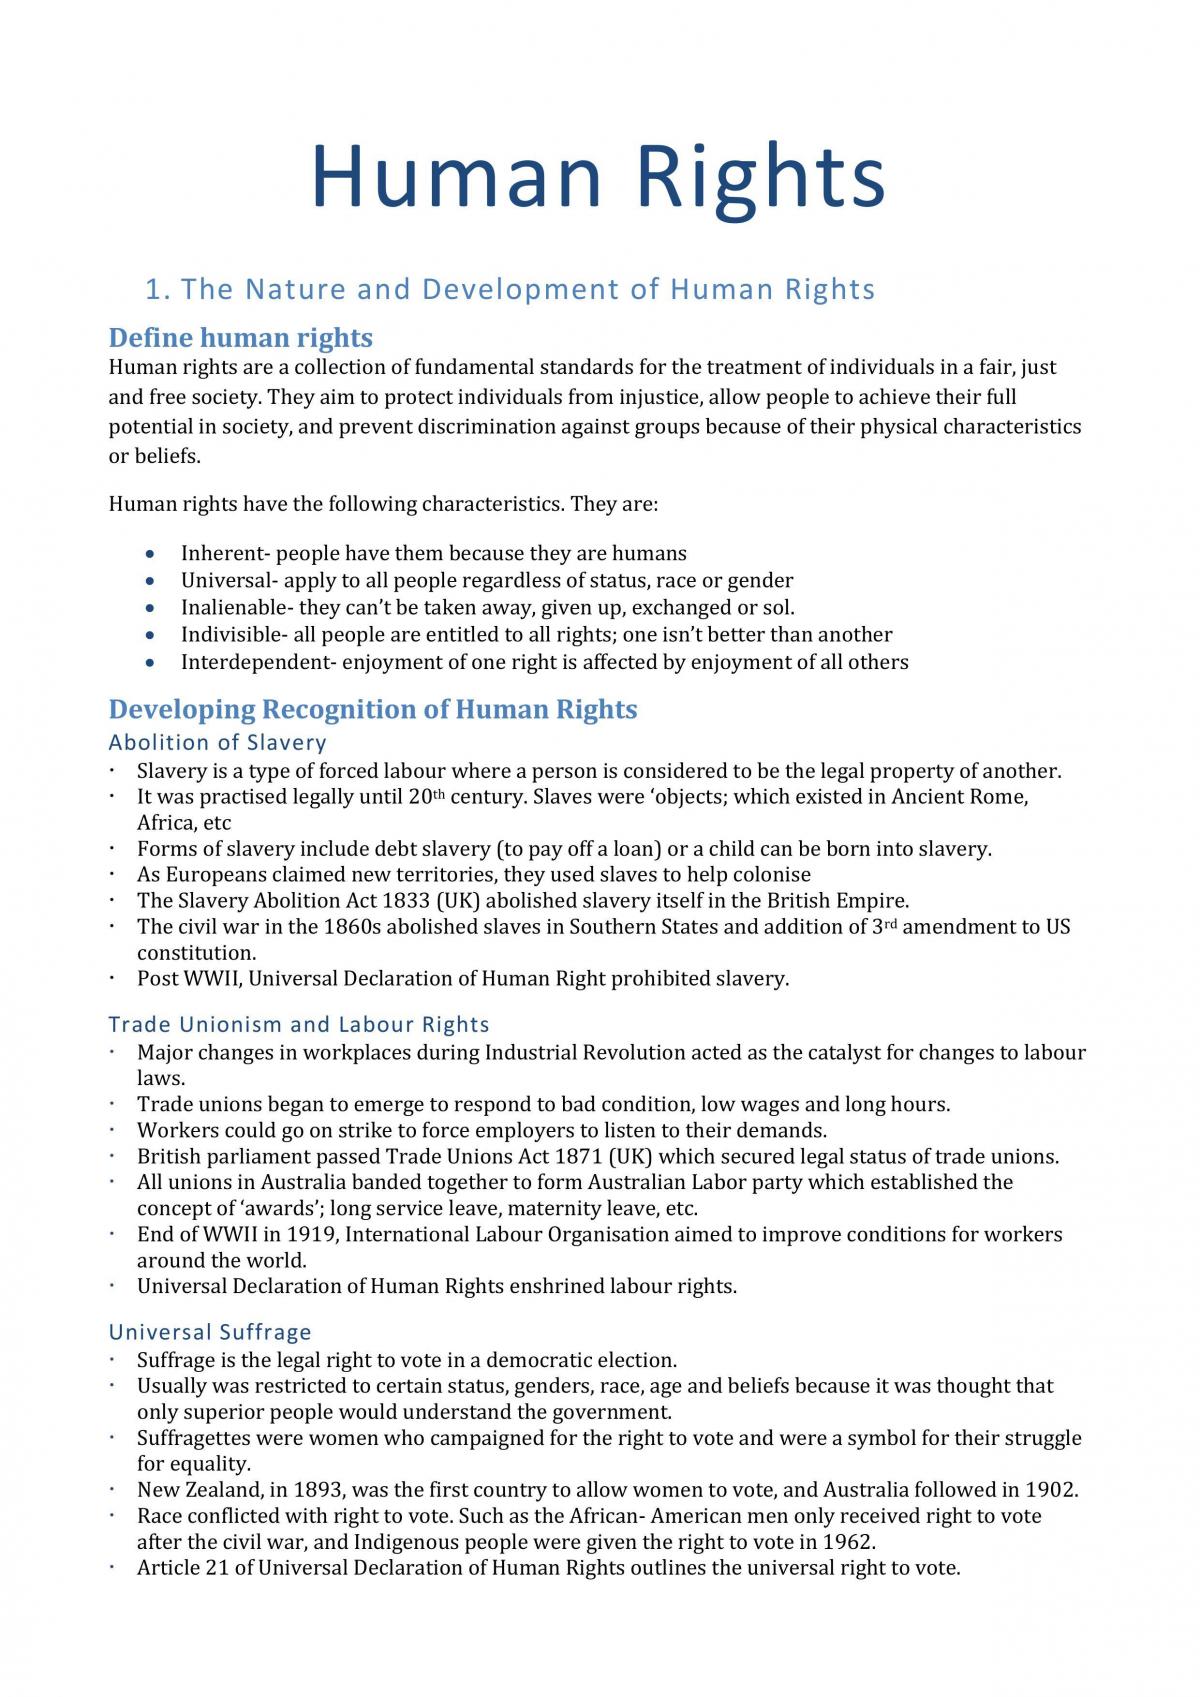 human rights assignment pdf for students